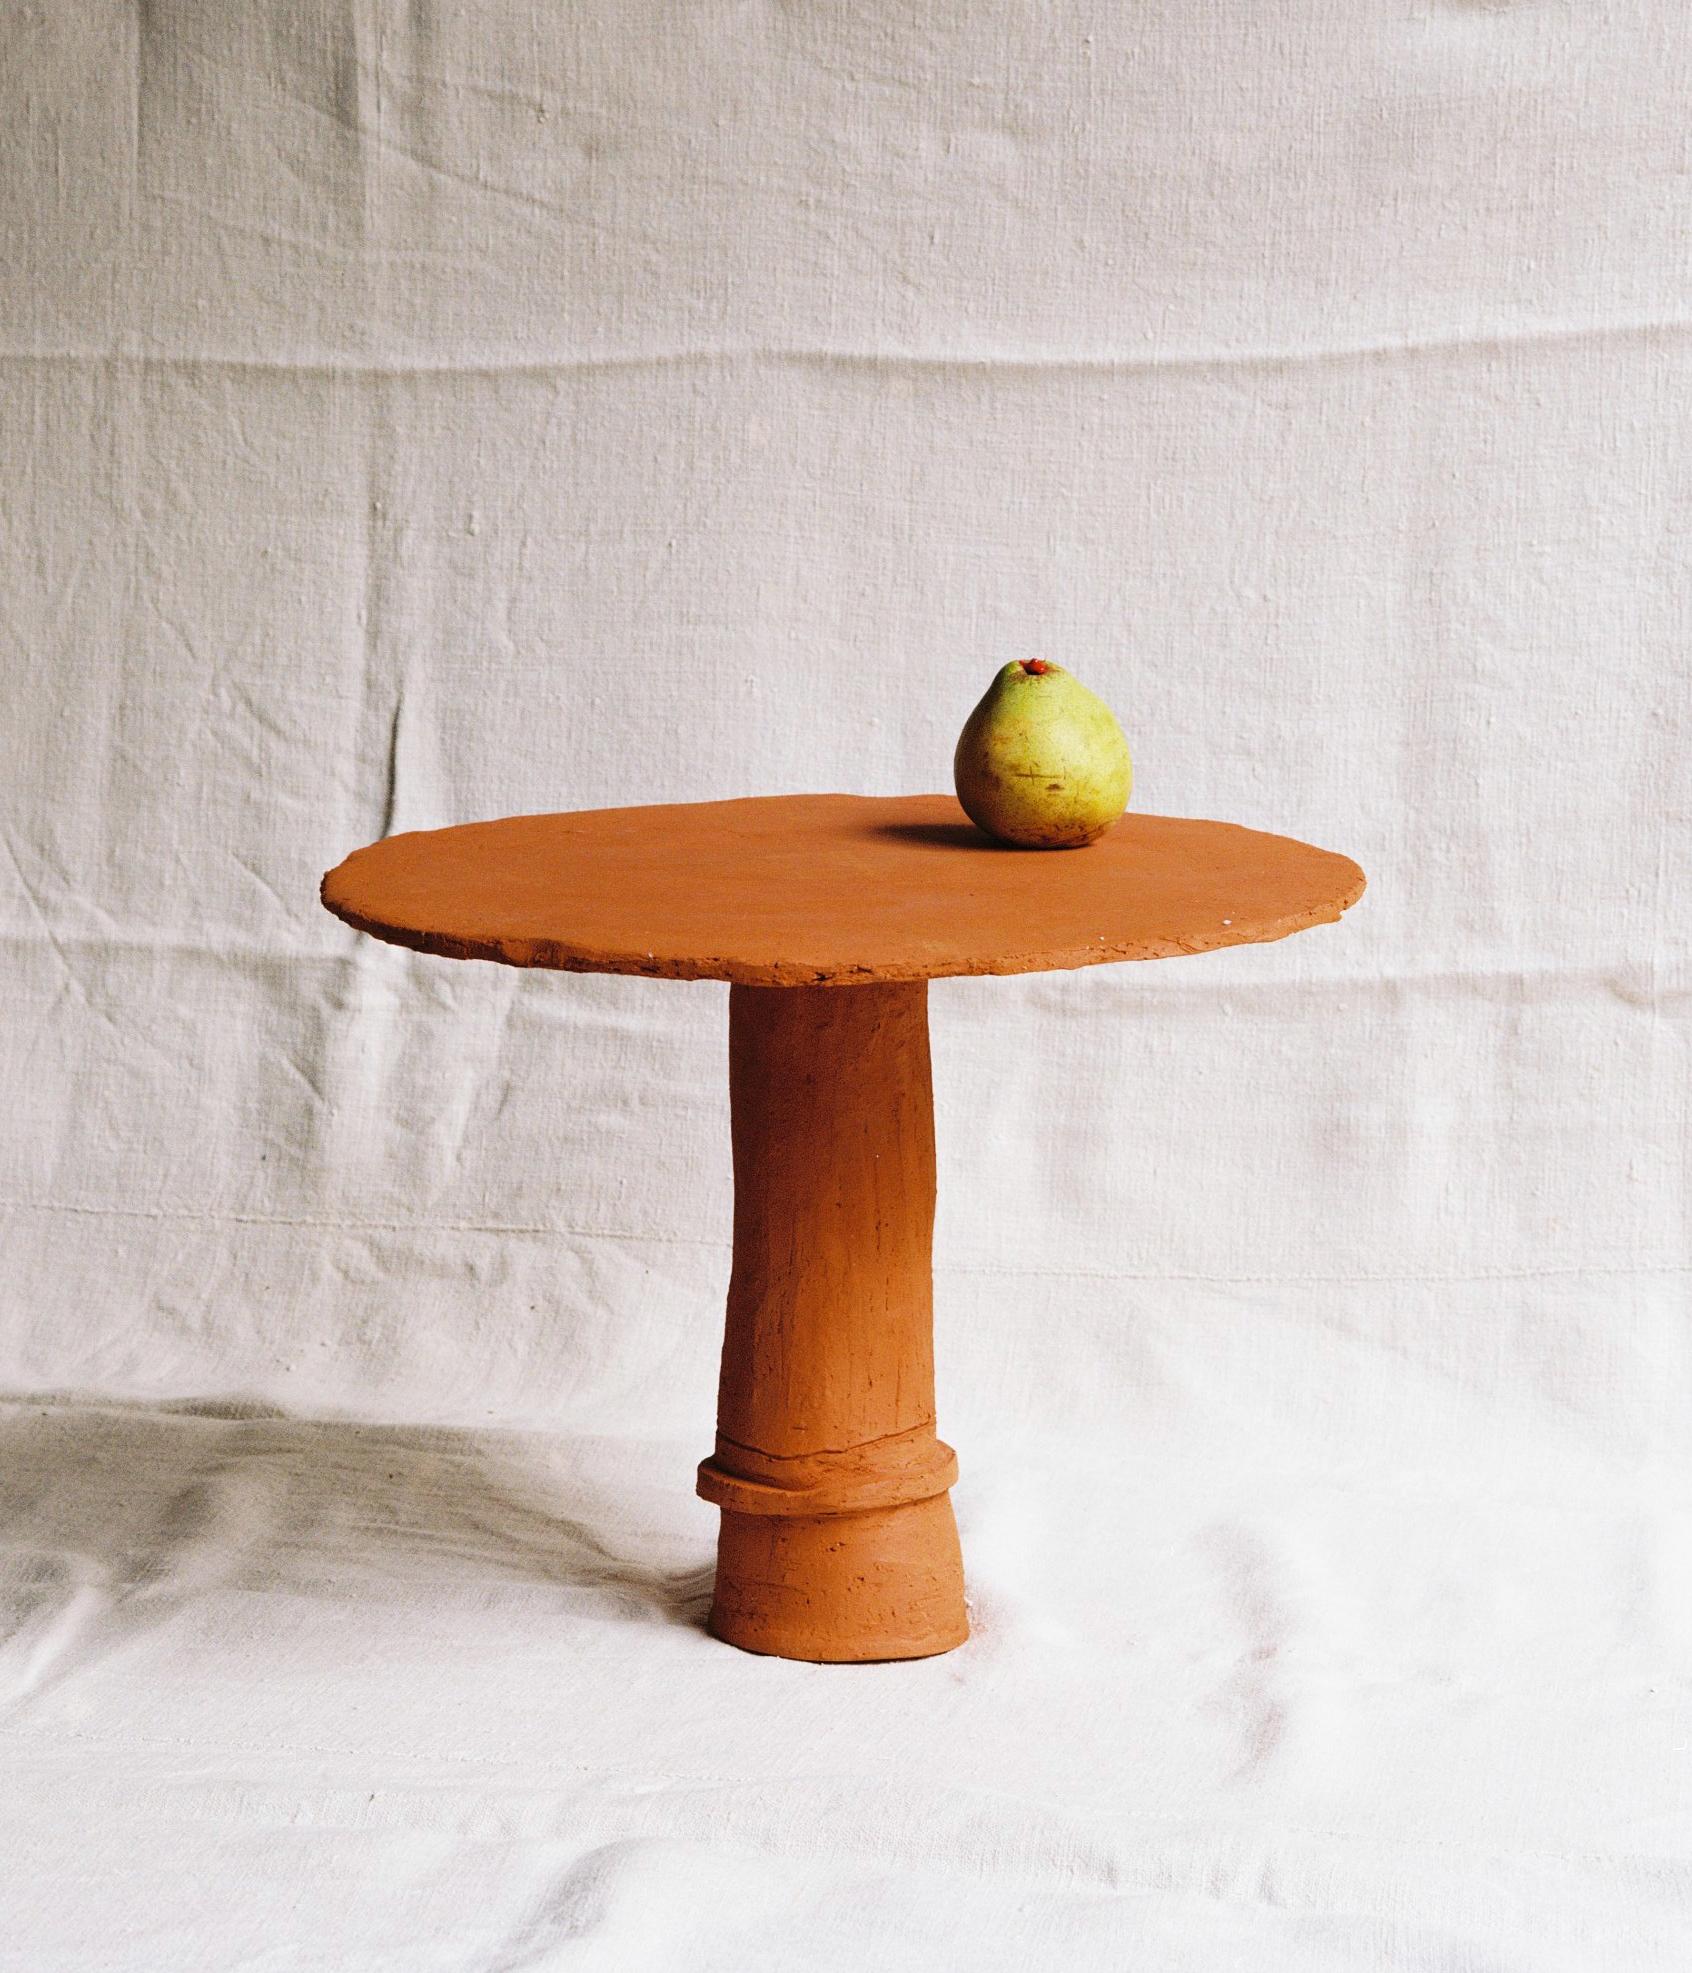 Standing between design and art, this table 